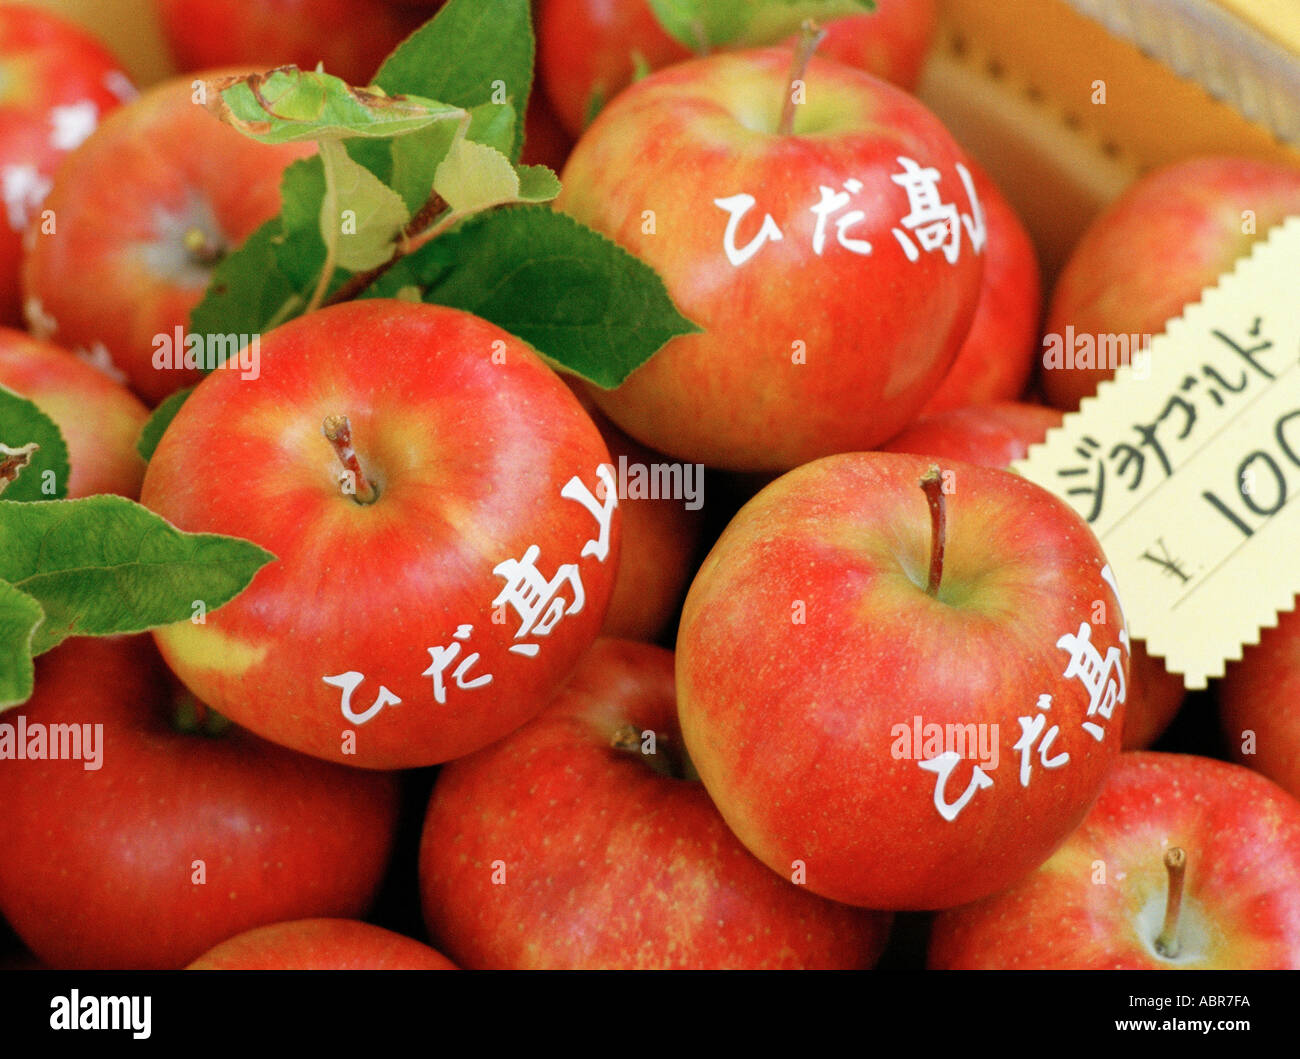 Apples for sale Early morning in outdoor market in Takayama, Japan Stock Photo